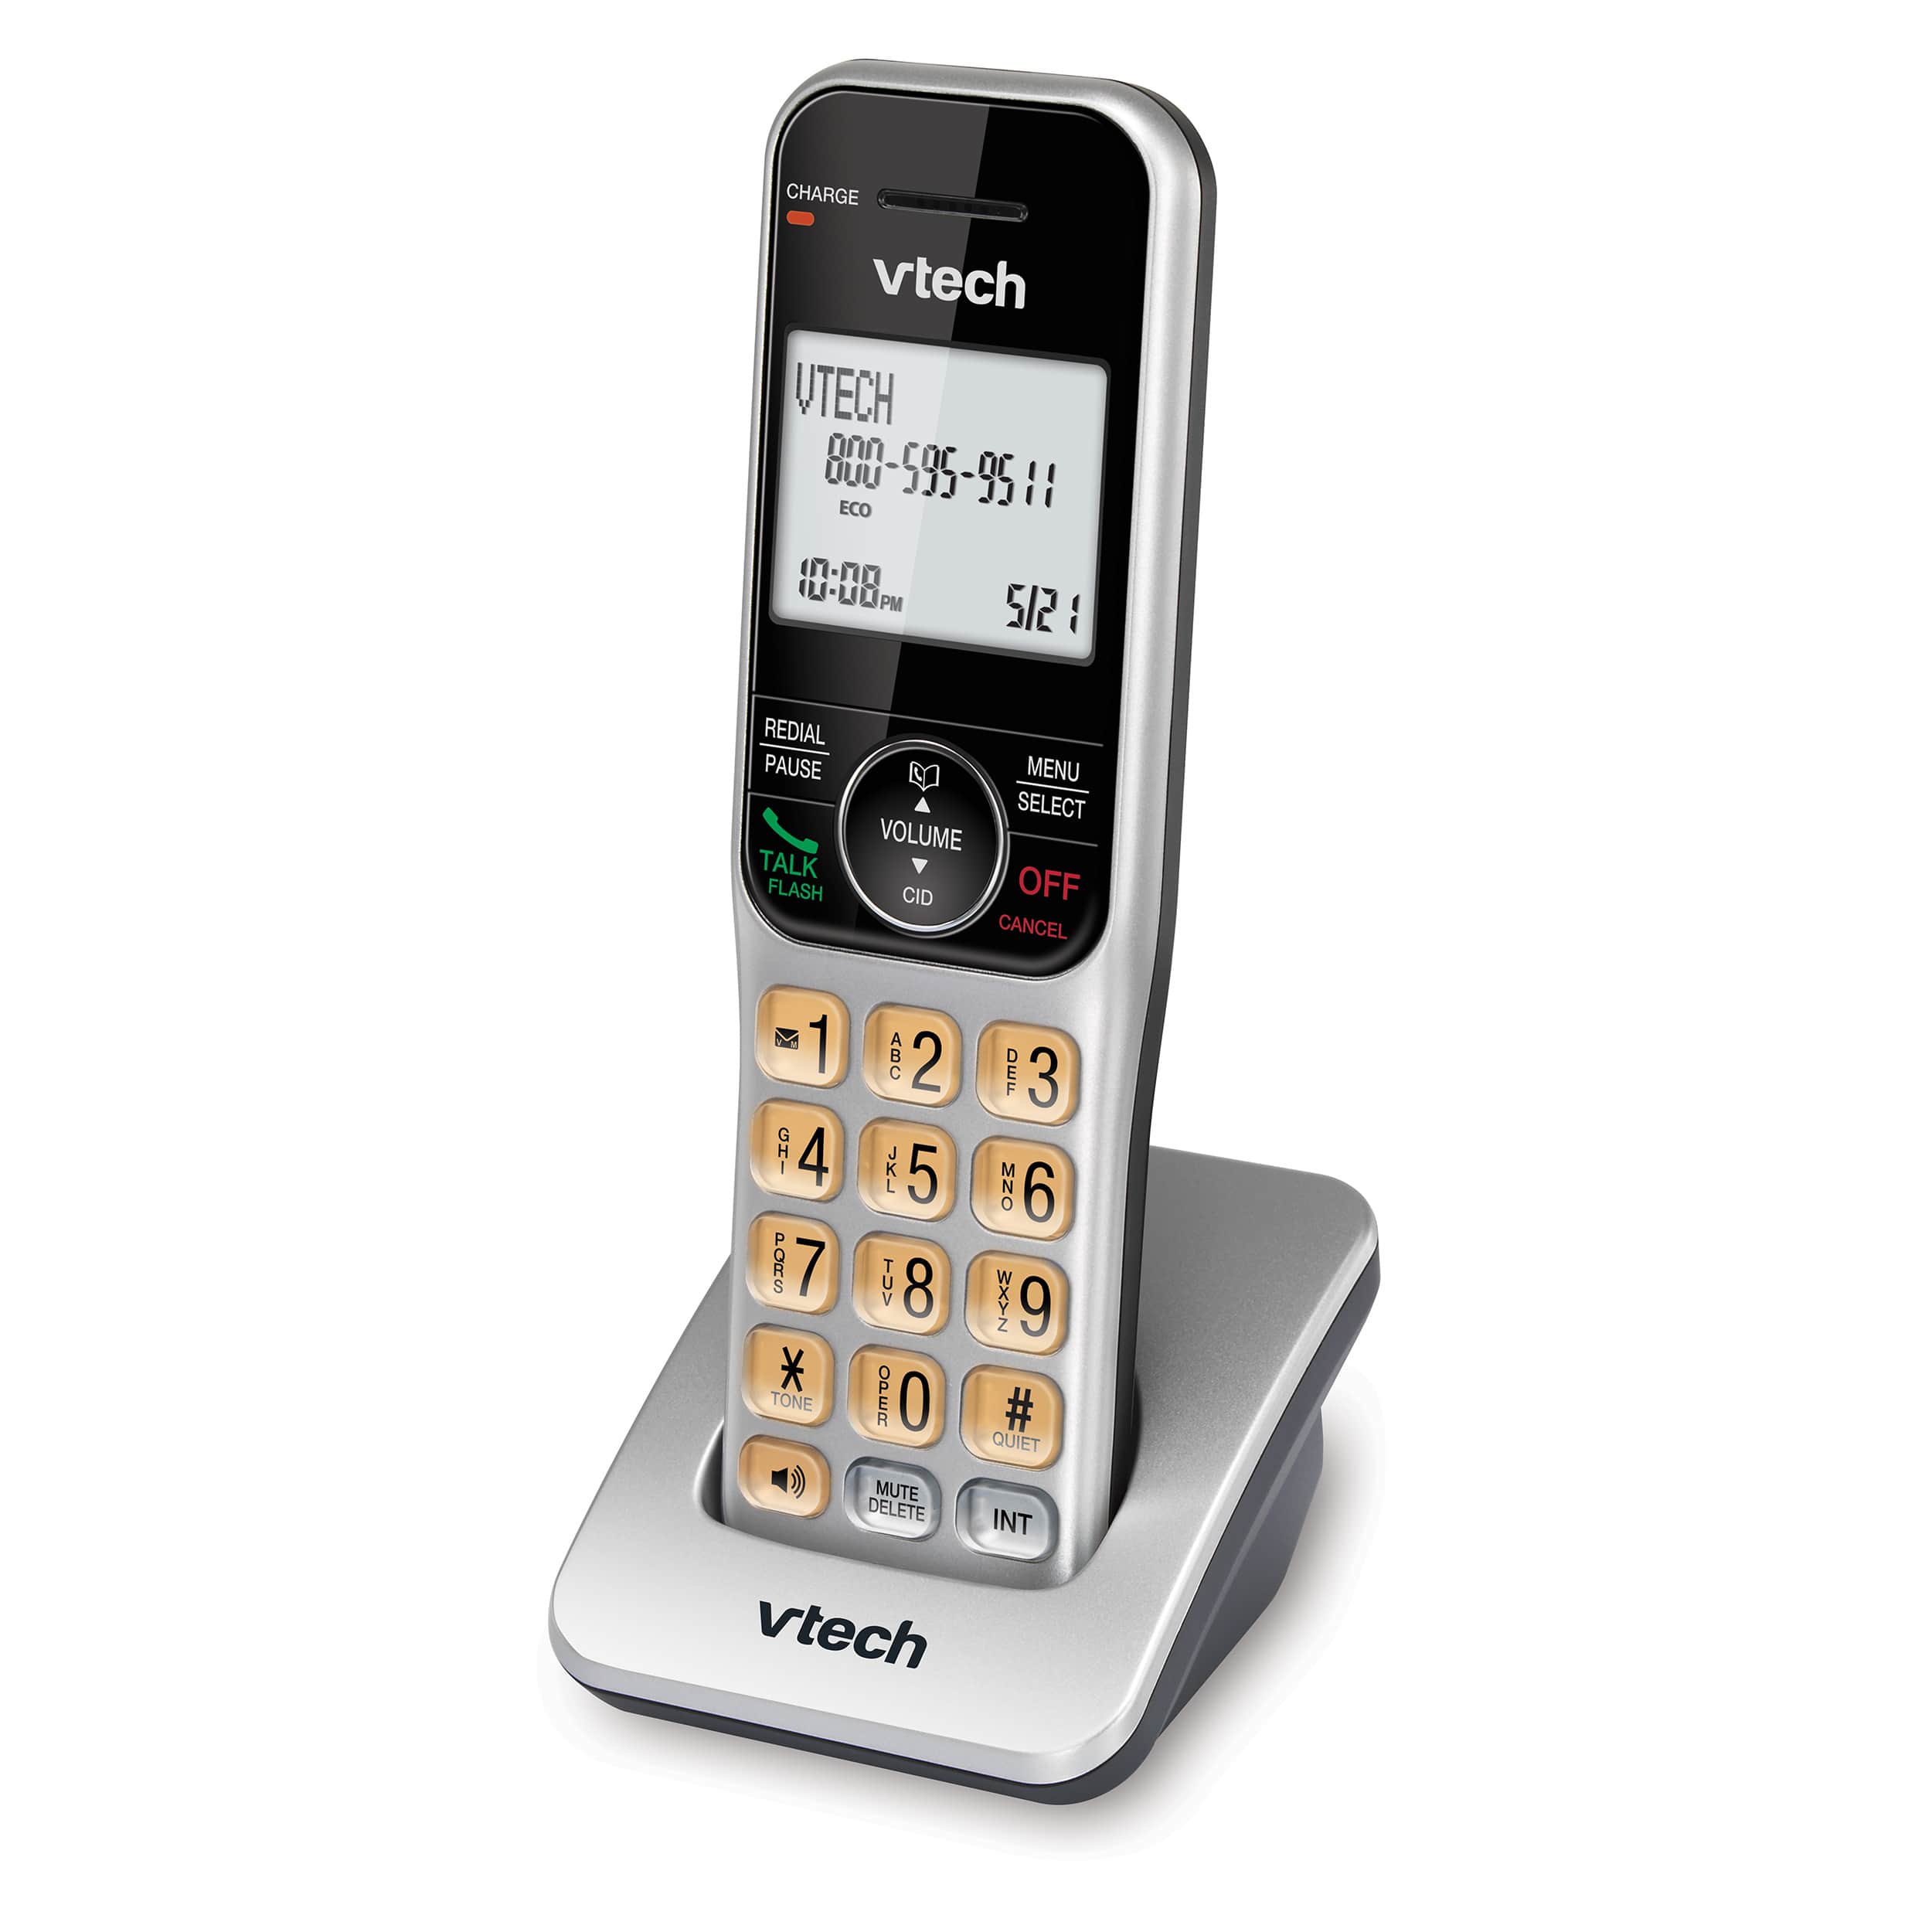 Accessory Handset with Call Block